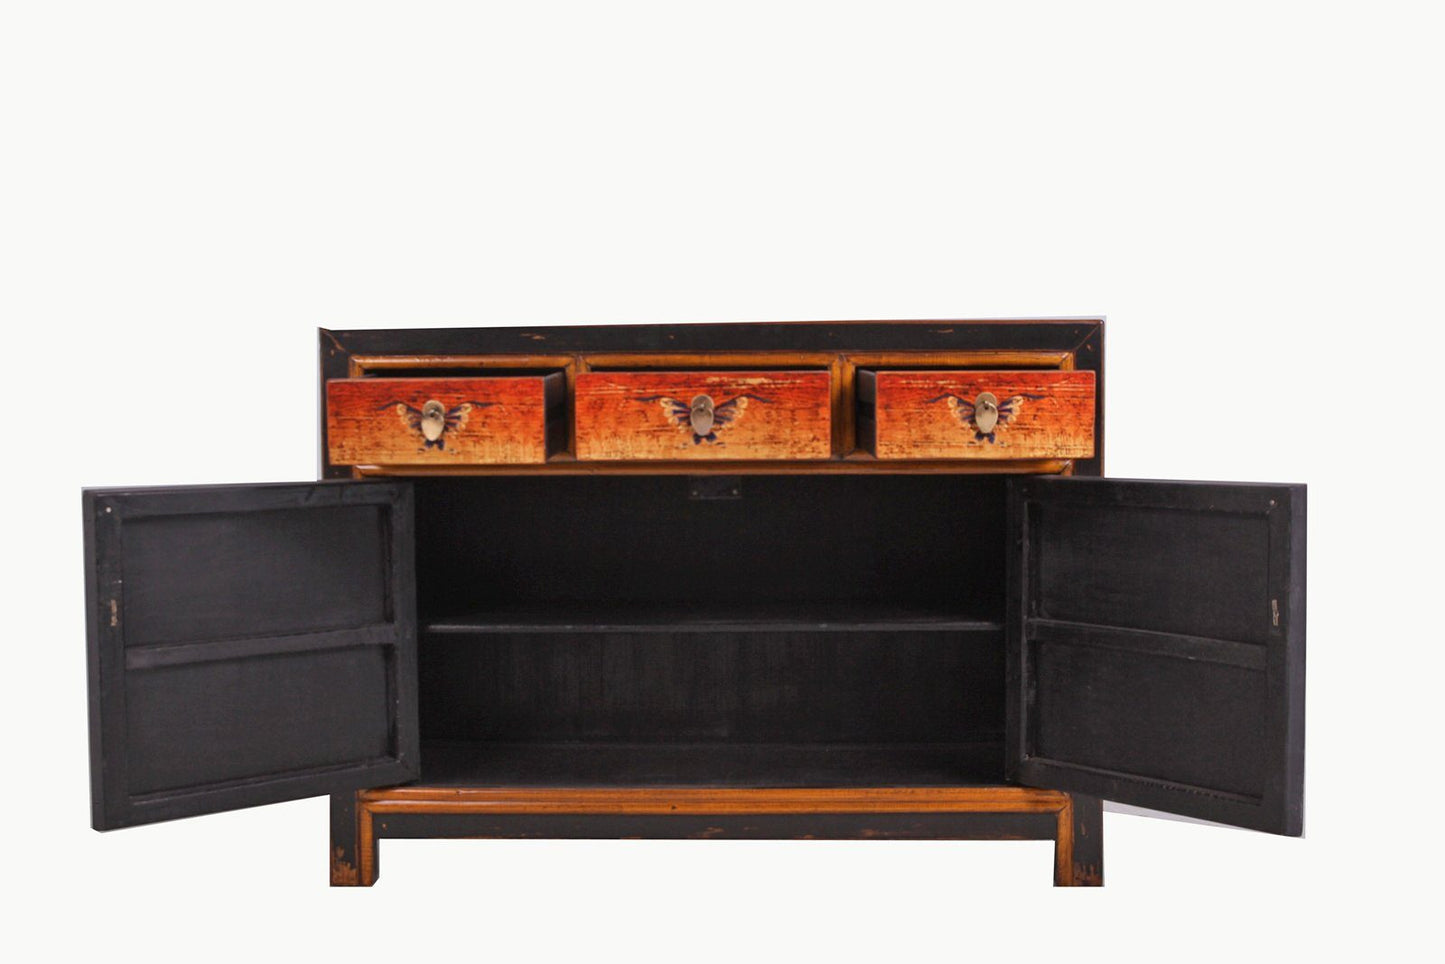 Chinese chest of drawers sideboard shelf "Fire" - Art. 33082-7